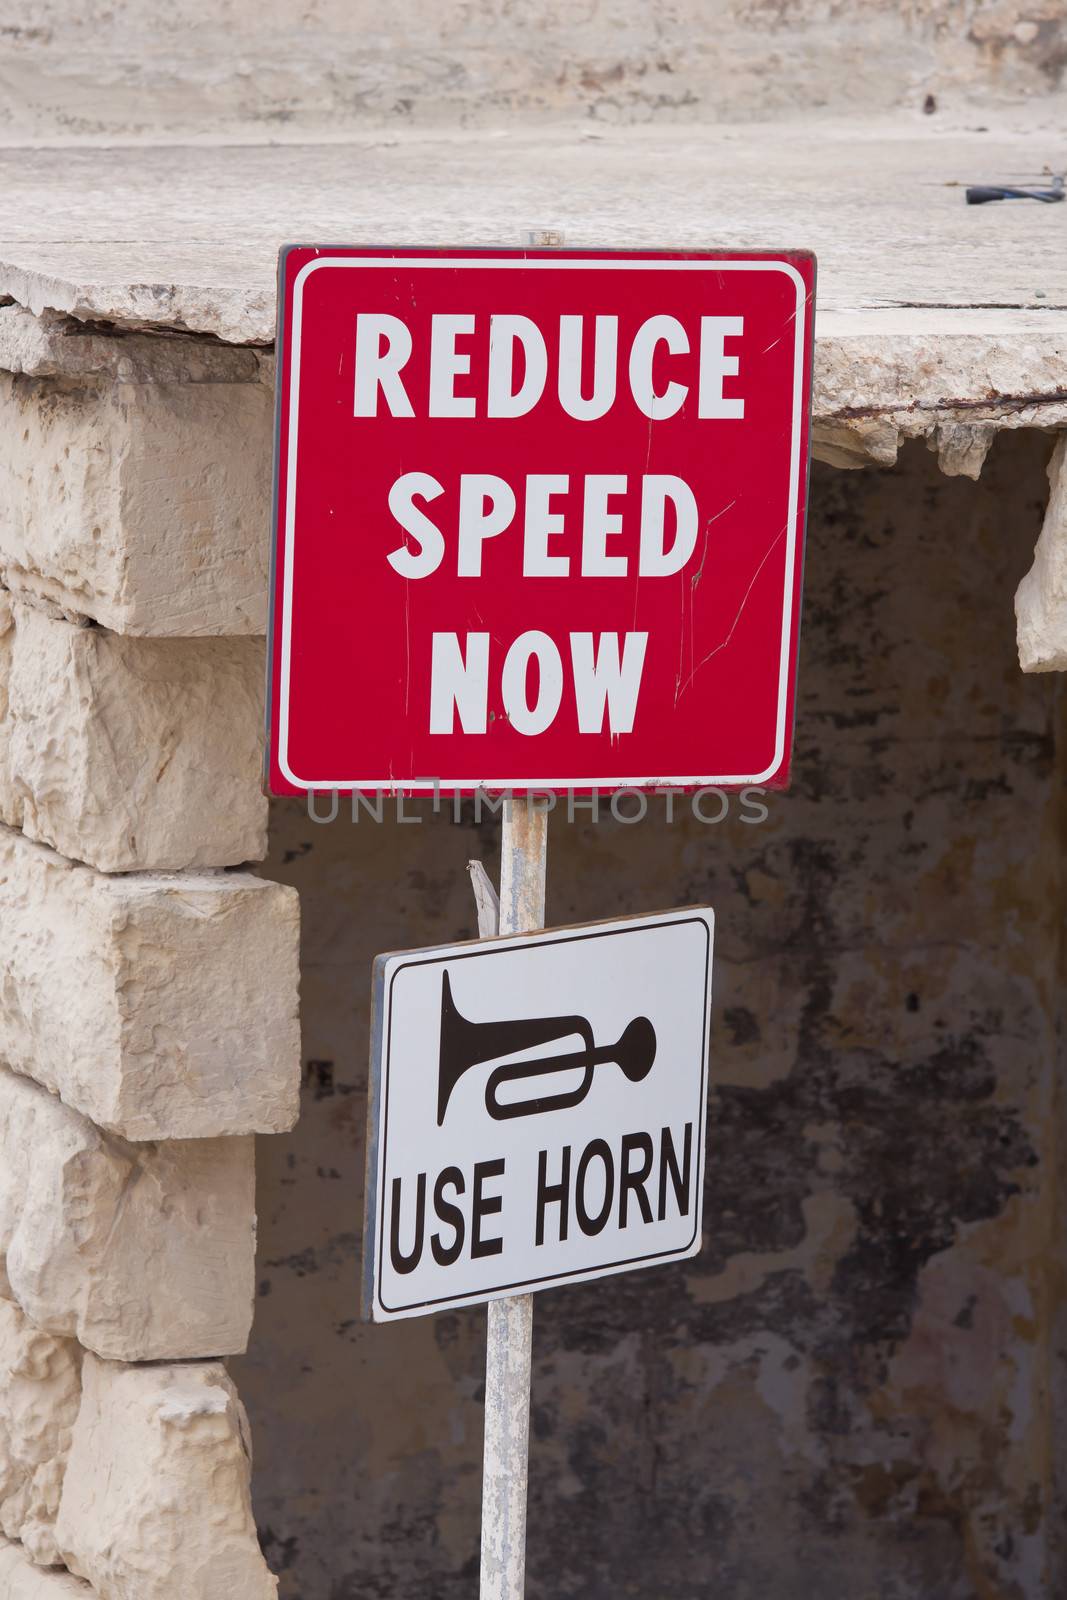 Reduce speed now by annems